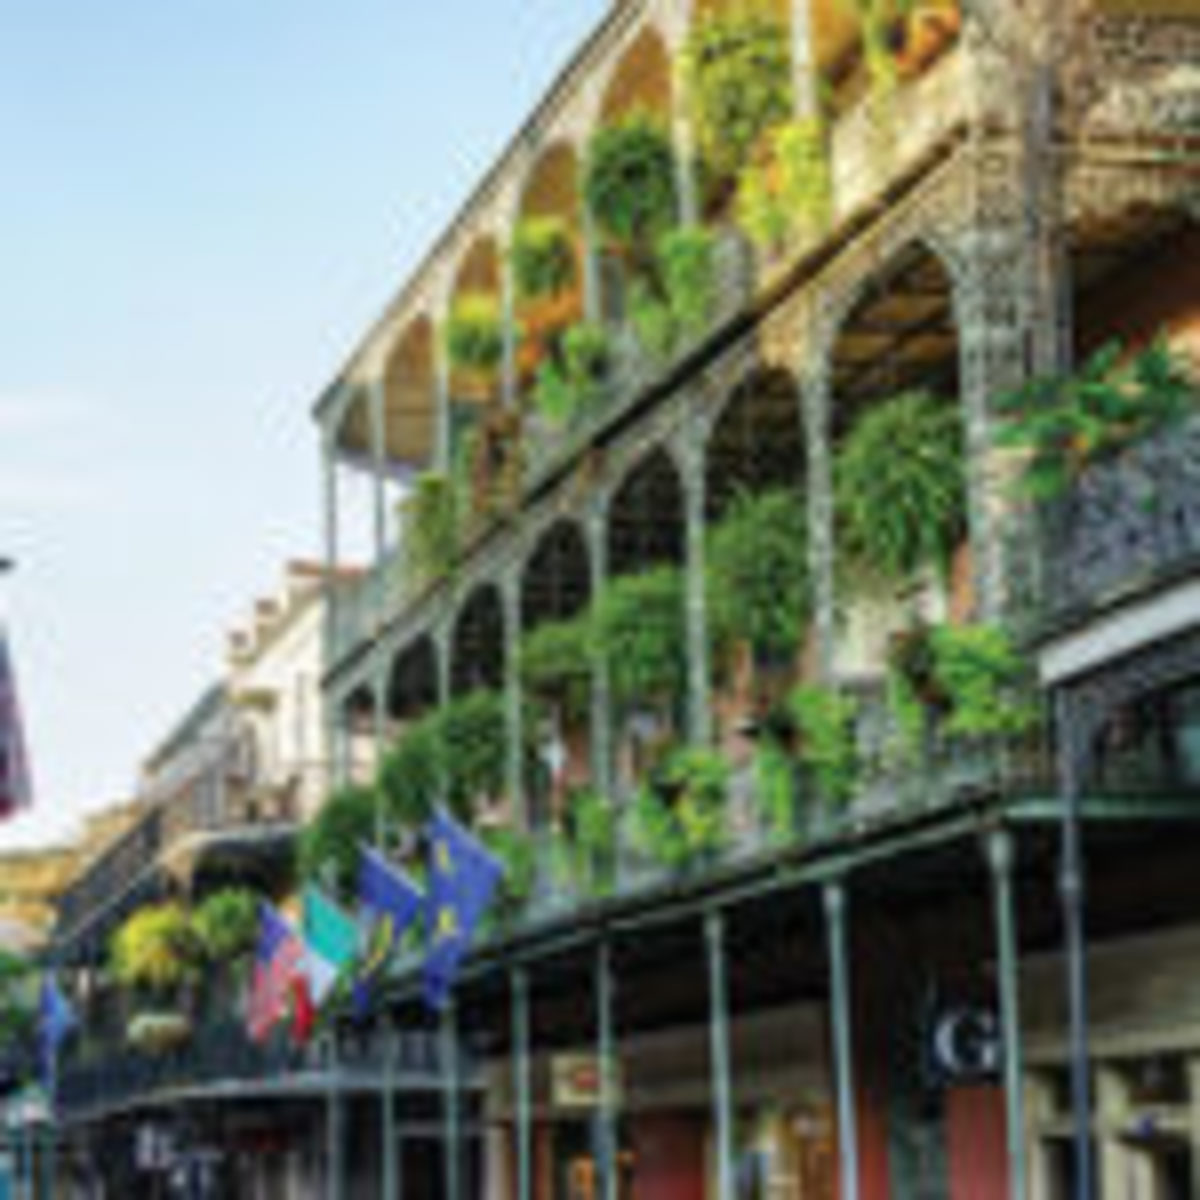 French Quarter by Paul Broussard, Courtesy New Orleans & Company, www.neworleans.com